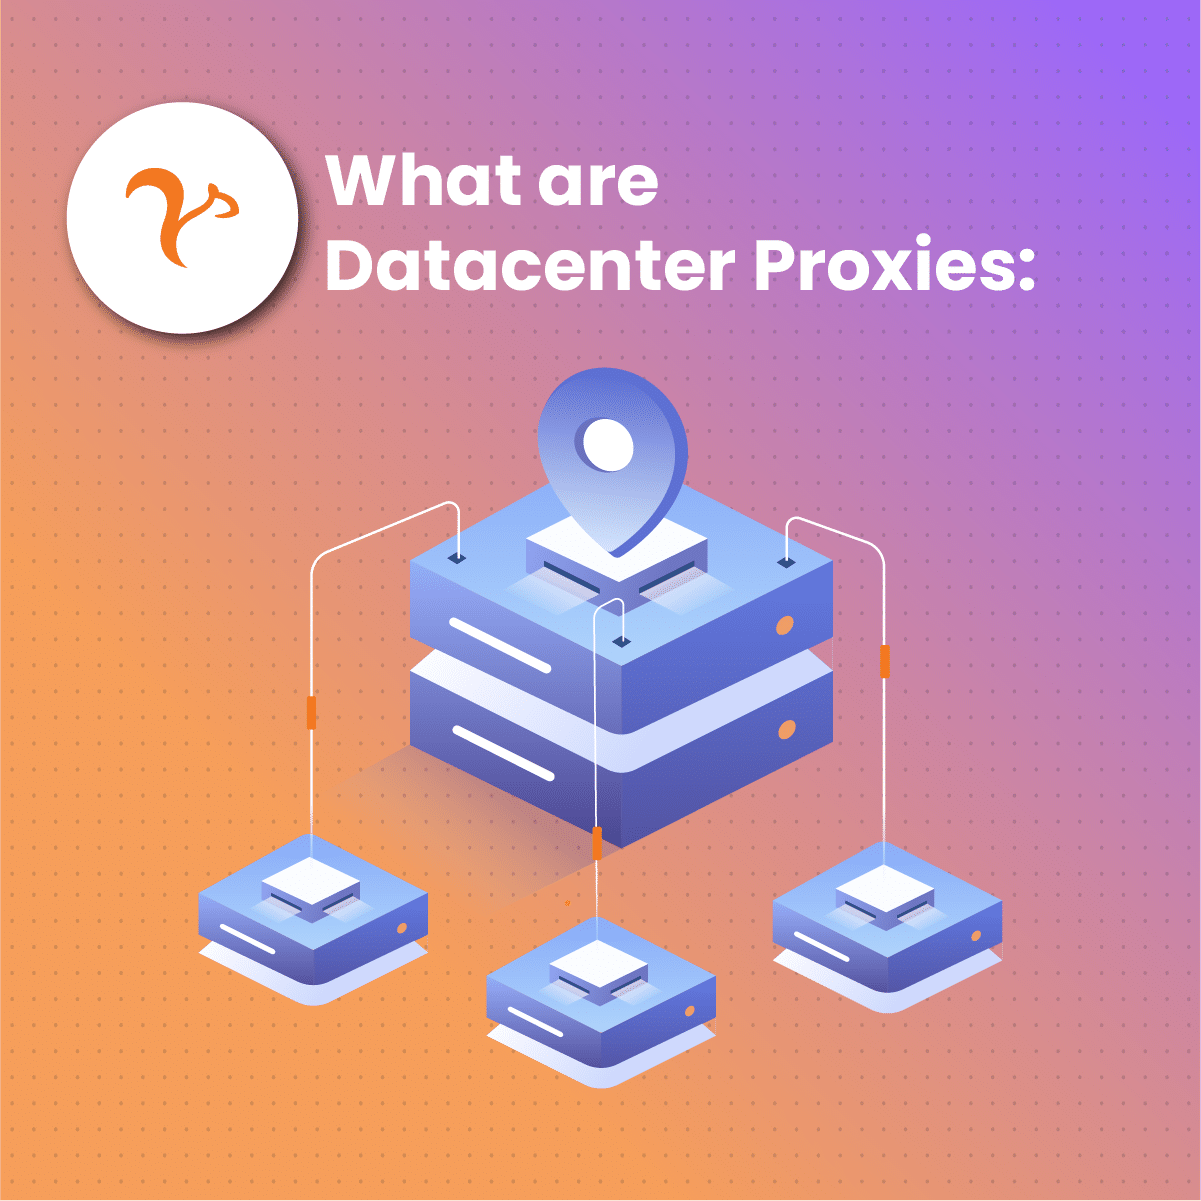 What are Datacenter Proxies